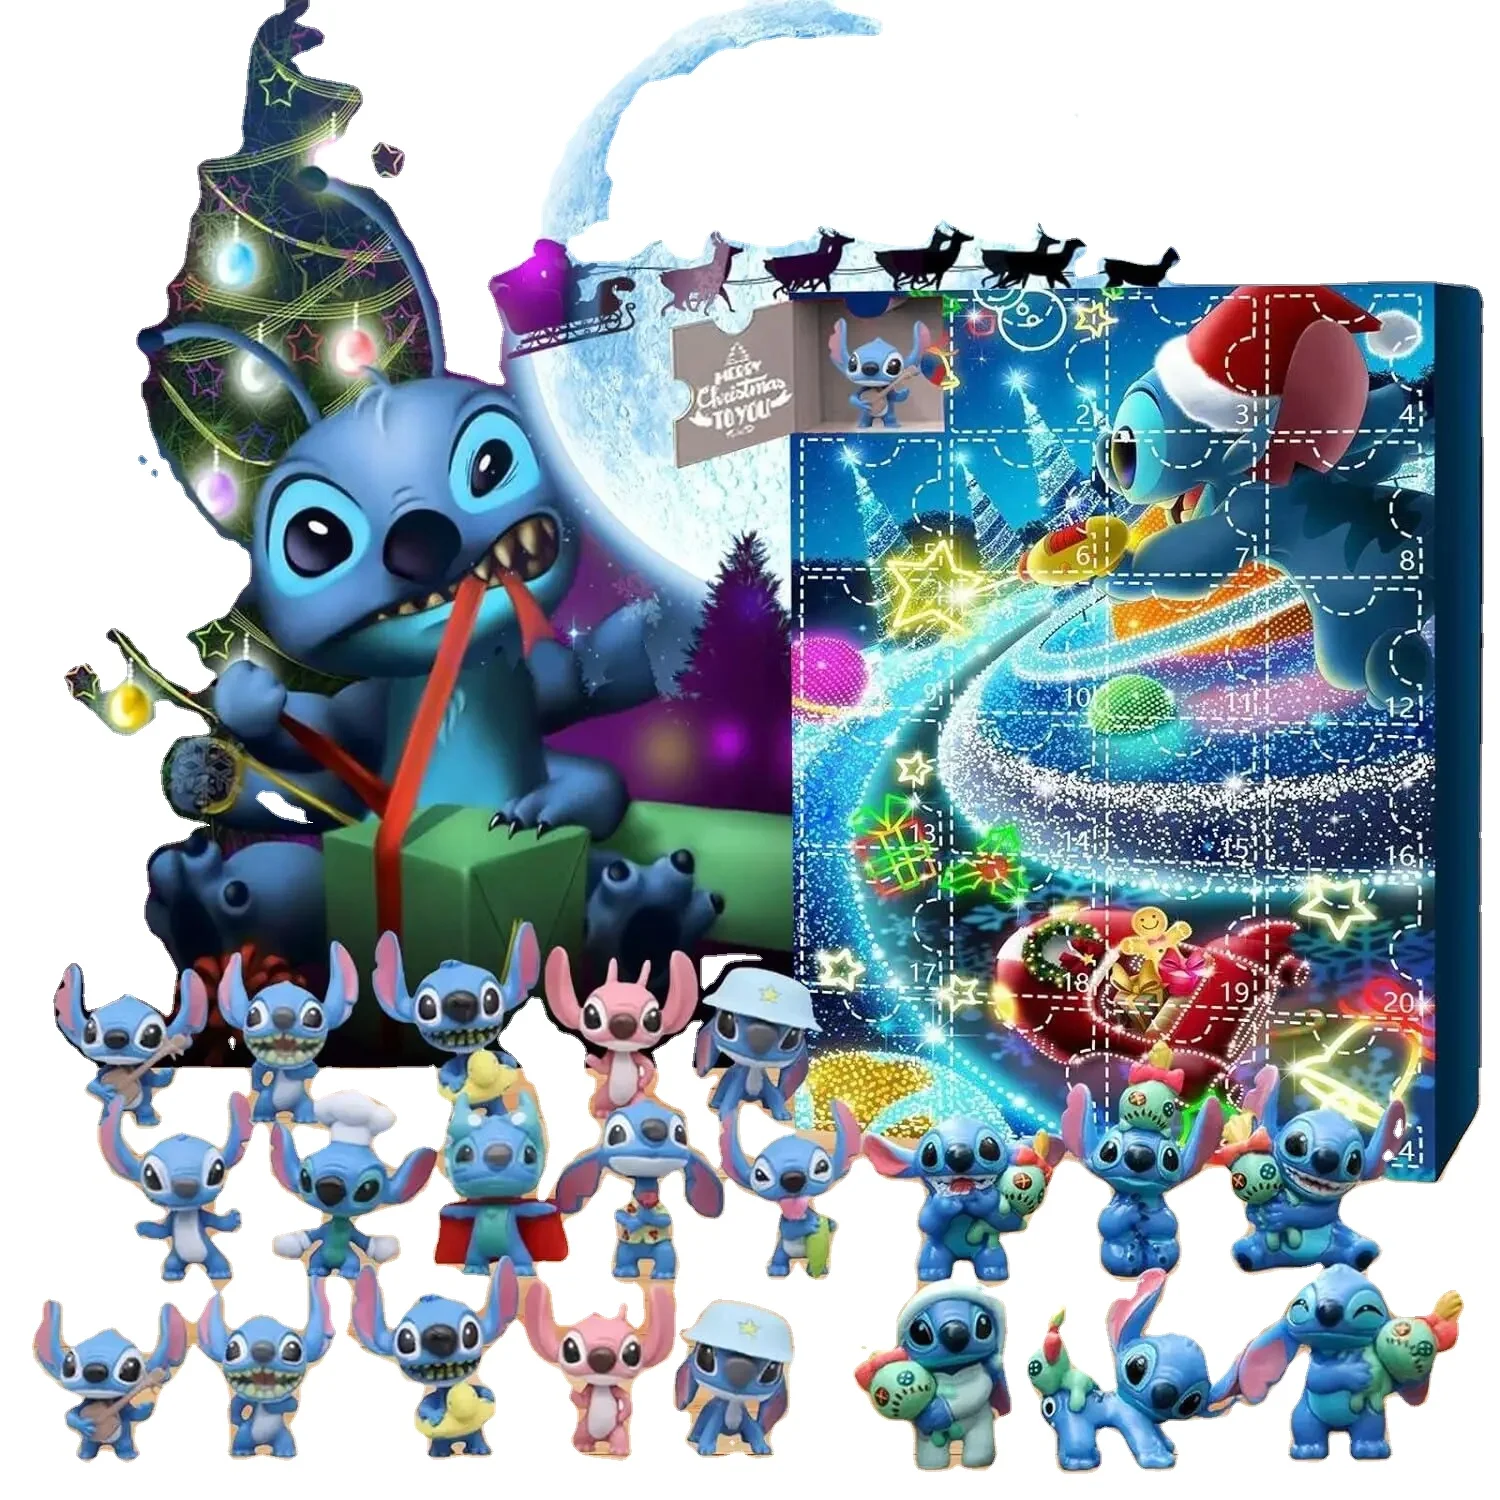 Christmas 24pcs Stitch Blind Box Toy Figures Anime PVC Doll Sets with Box Lilo & Stitch Blind Box Toys for Kids decoration